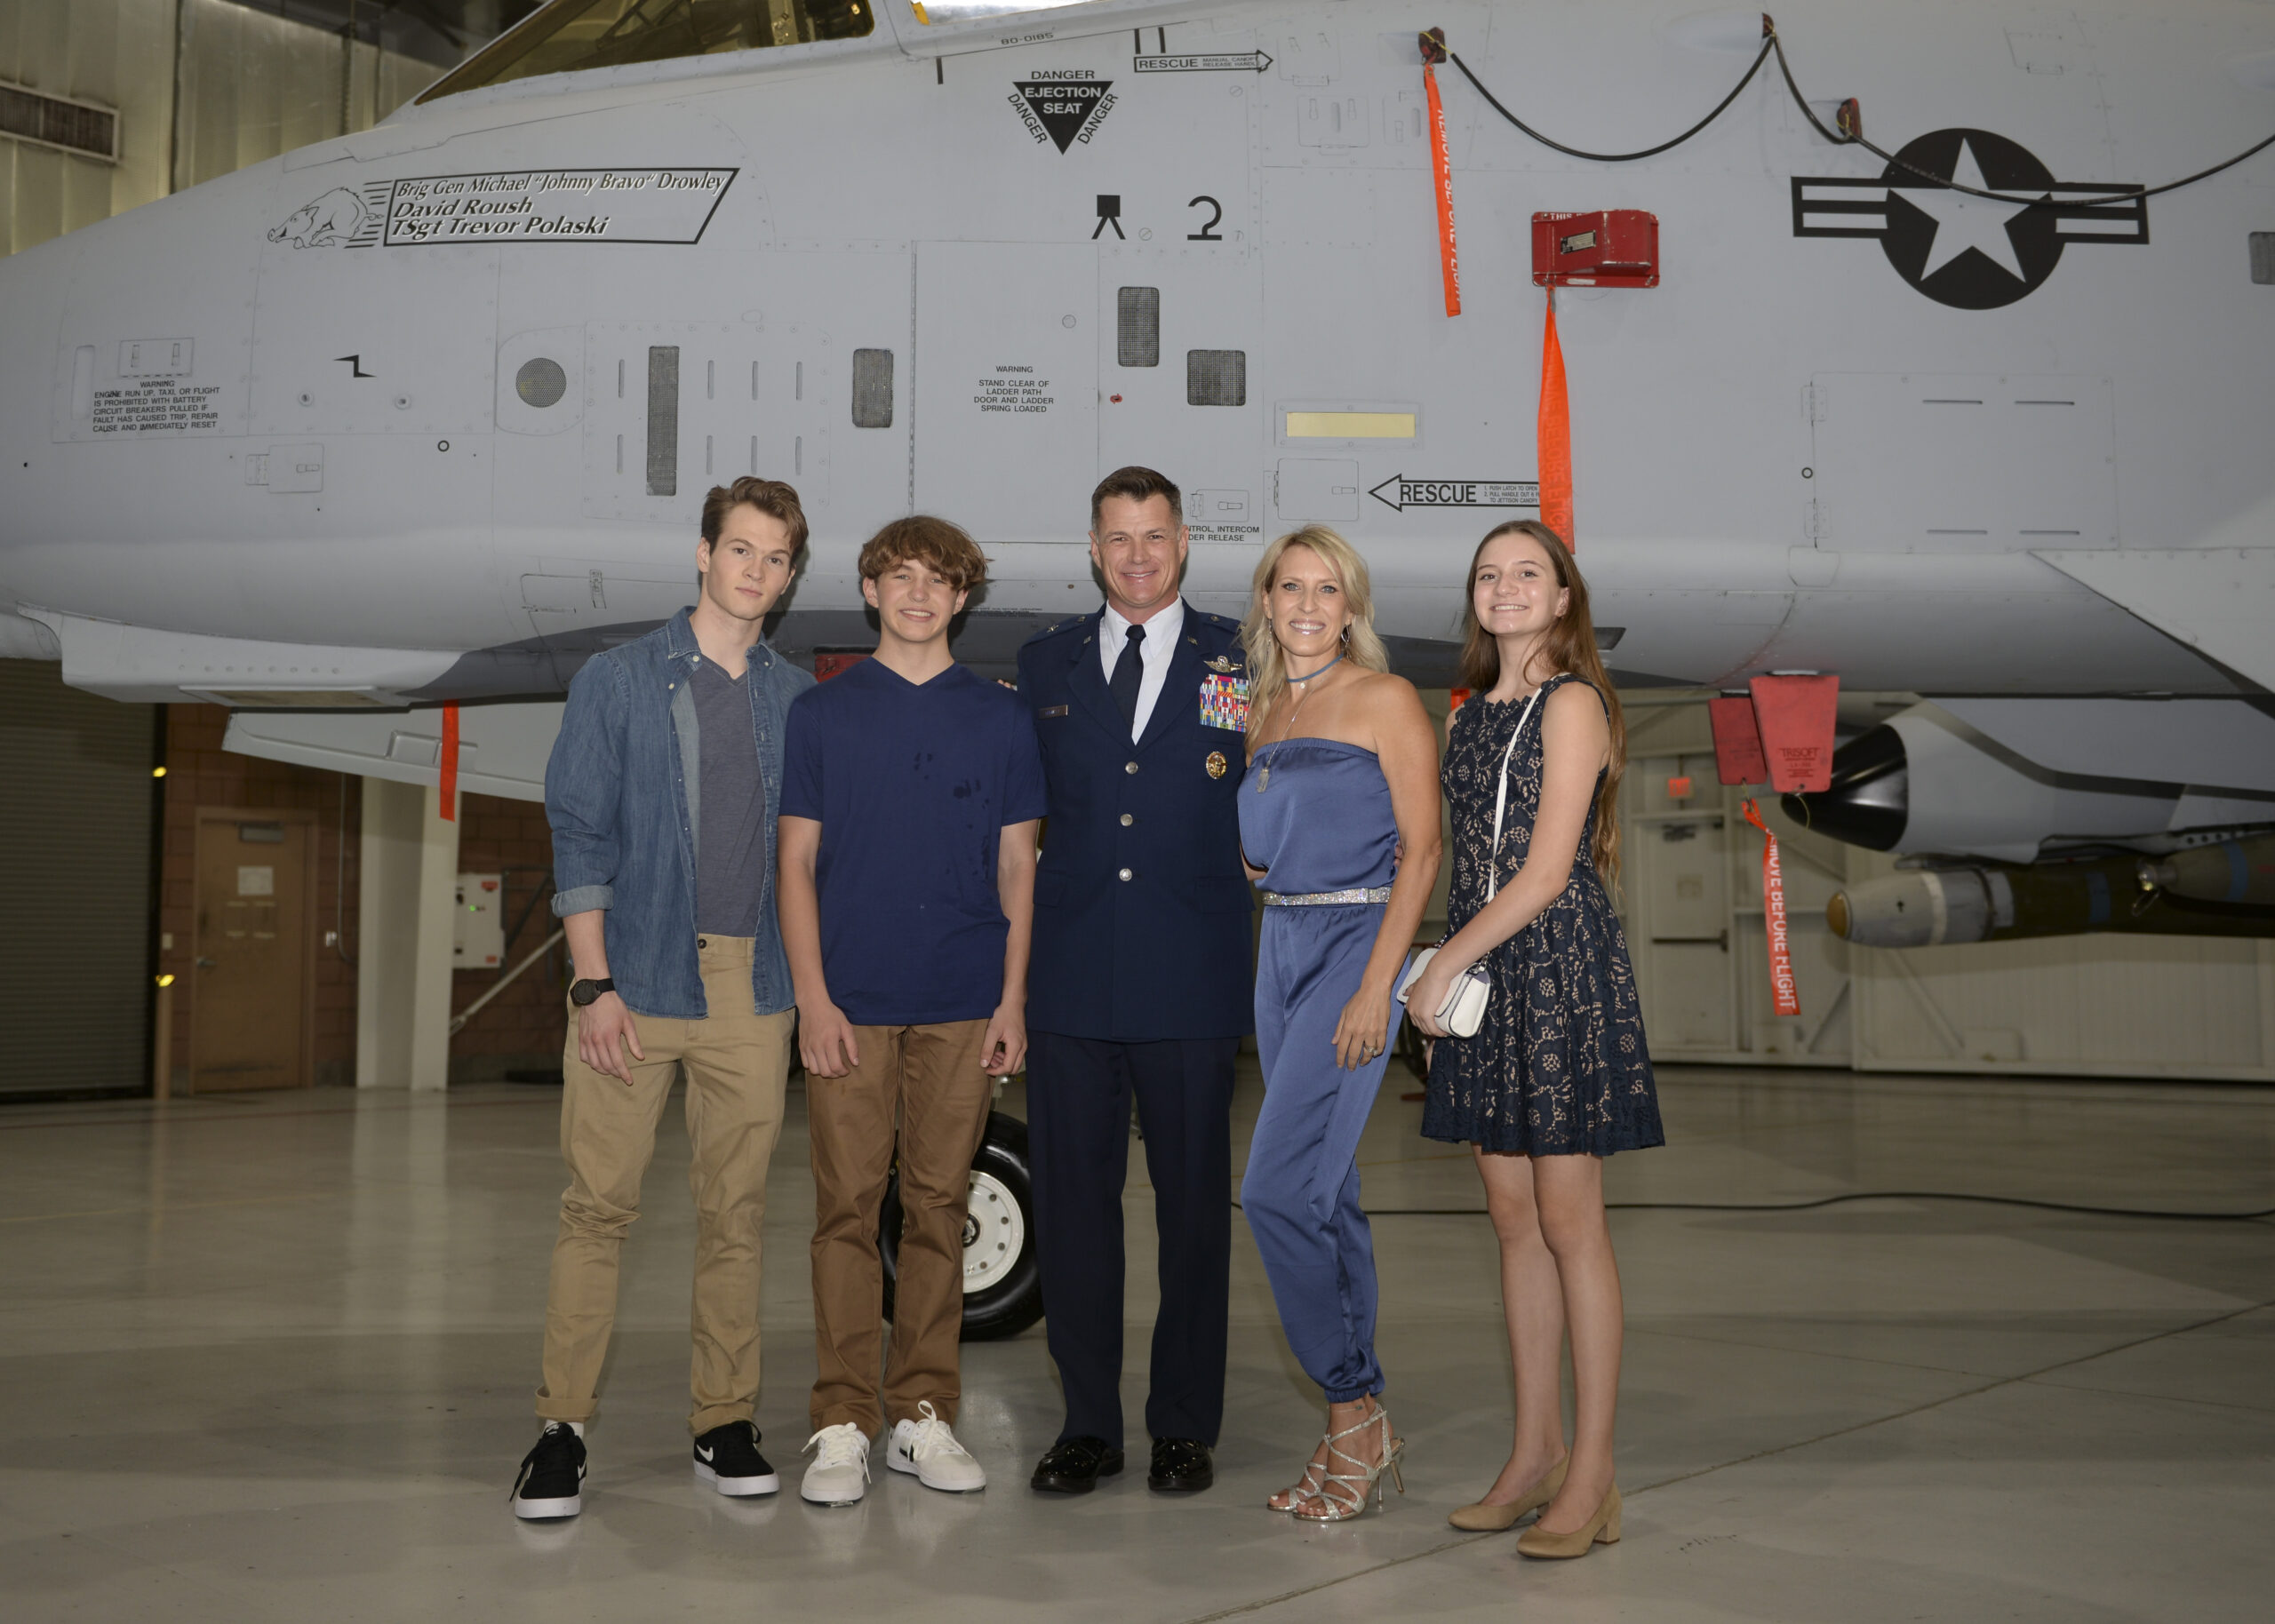 Dr. Drowley and her family posing for a photo with an airplane in the back.